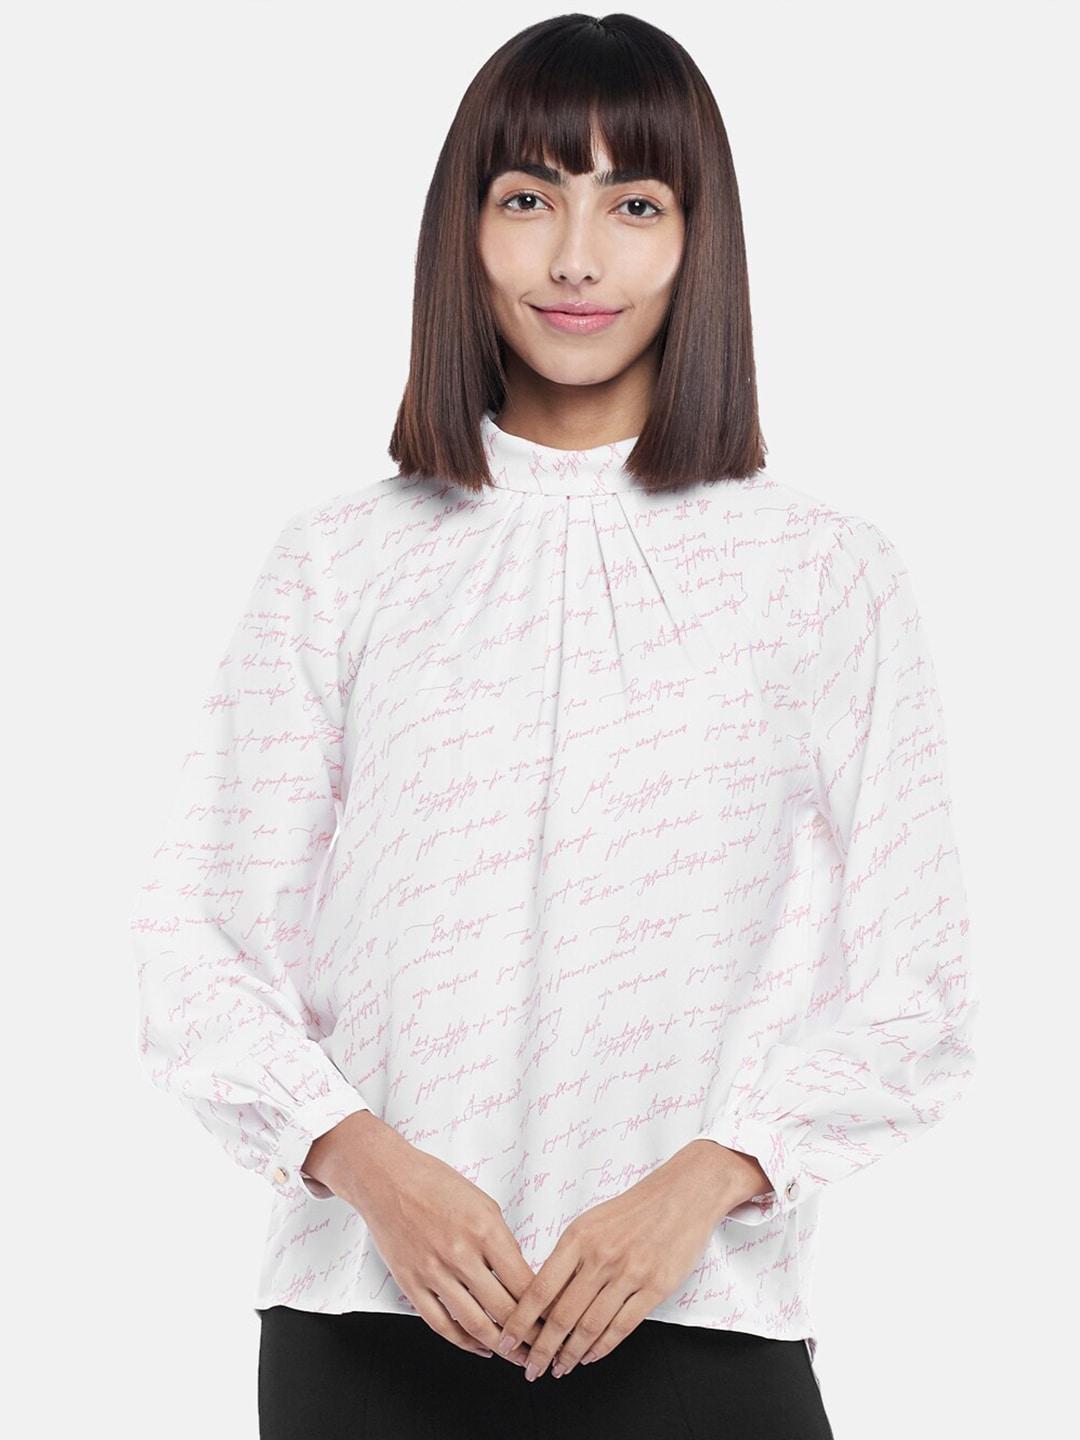 annabelle by pantaloons white & pink typography print top